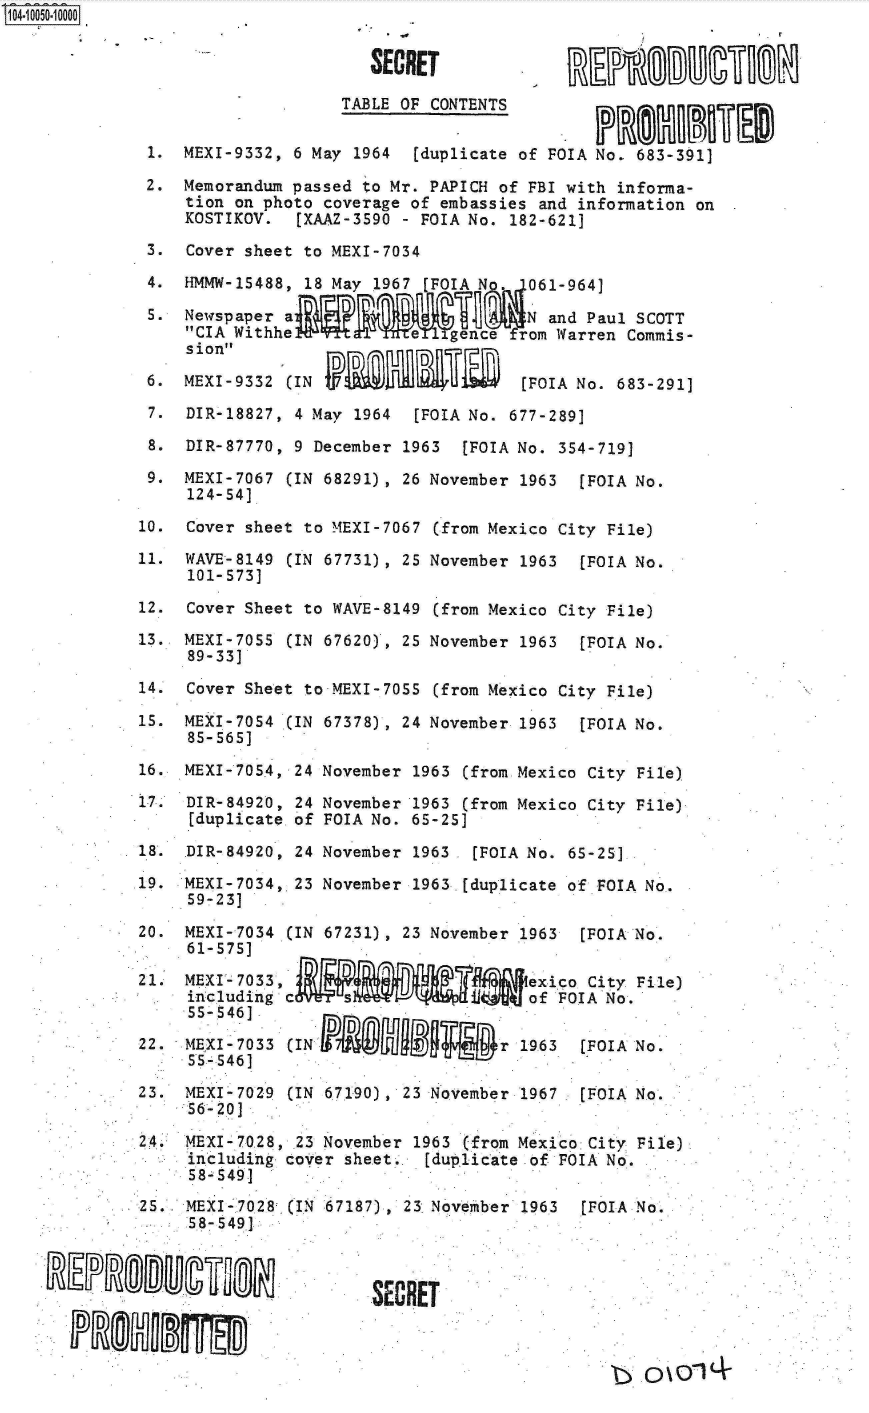 handle is hein.jfk/jfkarch07765 and id is 1 raw text is: 104-10050-10000


                                    SECRET

                                 TABLE OF CONTENTS


              1. MEXI-9332, 6 May 1964  (duplicate of FOIA No. 683-391)

              2. Memorandum passed to Mr. PAPICH of FBI with informa-
                  tion on photo coverage of embassies and information on
                  KOSTIKOV. [XAAZ-3590 - FOIA No. 182-621]

              3.  Cover sheet to MEXI-7034

              4. HMMW-15488, 18 May 1967 [FOIA N   061-964]

              5. Newspaper a                       N and Paul SCOTT
                 CIA Withhe            e igence from Warren Commis-
                 sion

              6. MEXI-9332 (IN I                   [FOIA No. 683-291]

              7.  DIR-18827, 4 May 1964 [FOLA No. 677-289]

              8.  DIR-87770, 9 December 1963 [FOIA No. 354-719]

              9. MEXI-7067 (IN 68291), 26 November 1963 [FOIA No.
                  124-54]

             10.  Cover sheet to MEXI-7067 (from Mexico City File)

             11. WAVE-8149 (IN 67731), 25 November 1963 [FOIA No.
                  101-573]

             12.  Cover Sheet to WAVE-8149 (from Mexico City File)

             13. MEXI-7055 (IN 67620), 25 November 1963 [FOIA No.
                  89-33]

             14.  Cover Sheet to MEXI-7055 (from Mexico City File)

             15. MEXI-7054 (IN 67378), 24 November 1963 [FOIA No.
                  85-565]

             16. MEXI-7054, 24 November 1963 (from Mexico City File)

             17.  DIR-84920, 24 November 1963 (from Mexico City File)
                  [duplicate of FOIA No. 65-25]
             18.  DIR-84920, 24 November 1963. [FOIA No. 65-25]

             19. MEXI-7034, 23 November 1963.[duplicate of FOIA No.
                  59-23]

             20. MEXI-7034 (IN 67231), 23 November 1963 [FOIA No.
                  61-575]

             21. MEXI- 7033                        exico City File)
                  including c    s                 of FOIA No.
                  55-546]

             22. MEXI-7033  (IN                 r 1963[       No.
                  55-546]

             23. MEXI-7029  (IN 67190), 23 November 1967 [FOIA No.
                  56-20]

             24.  MEXI-7028, 23 November 1963 (from Mexico City File)
                  including cover sheet. [duplicate of FOIA No..
                  58-549]

             25.  MEXI 7028 (IN 67187) 23 November 1963 [FOIA No.
                  58-549]



            ~EfPLflK fU~Ui  ~ftECRET


                         npb


